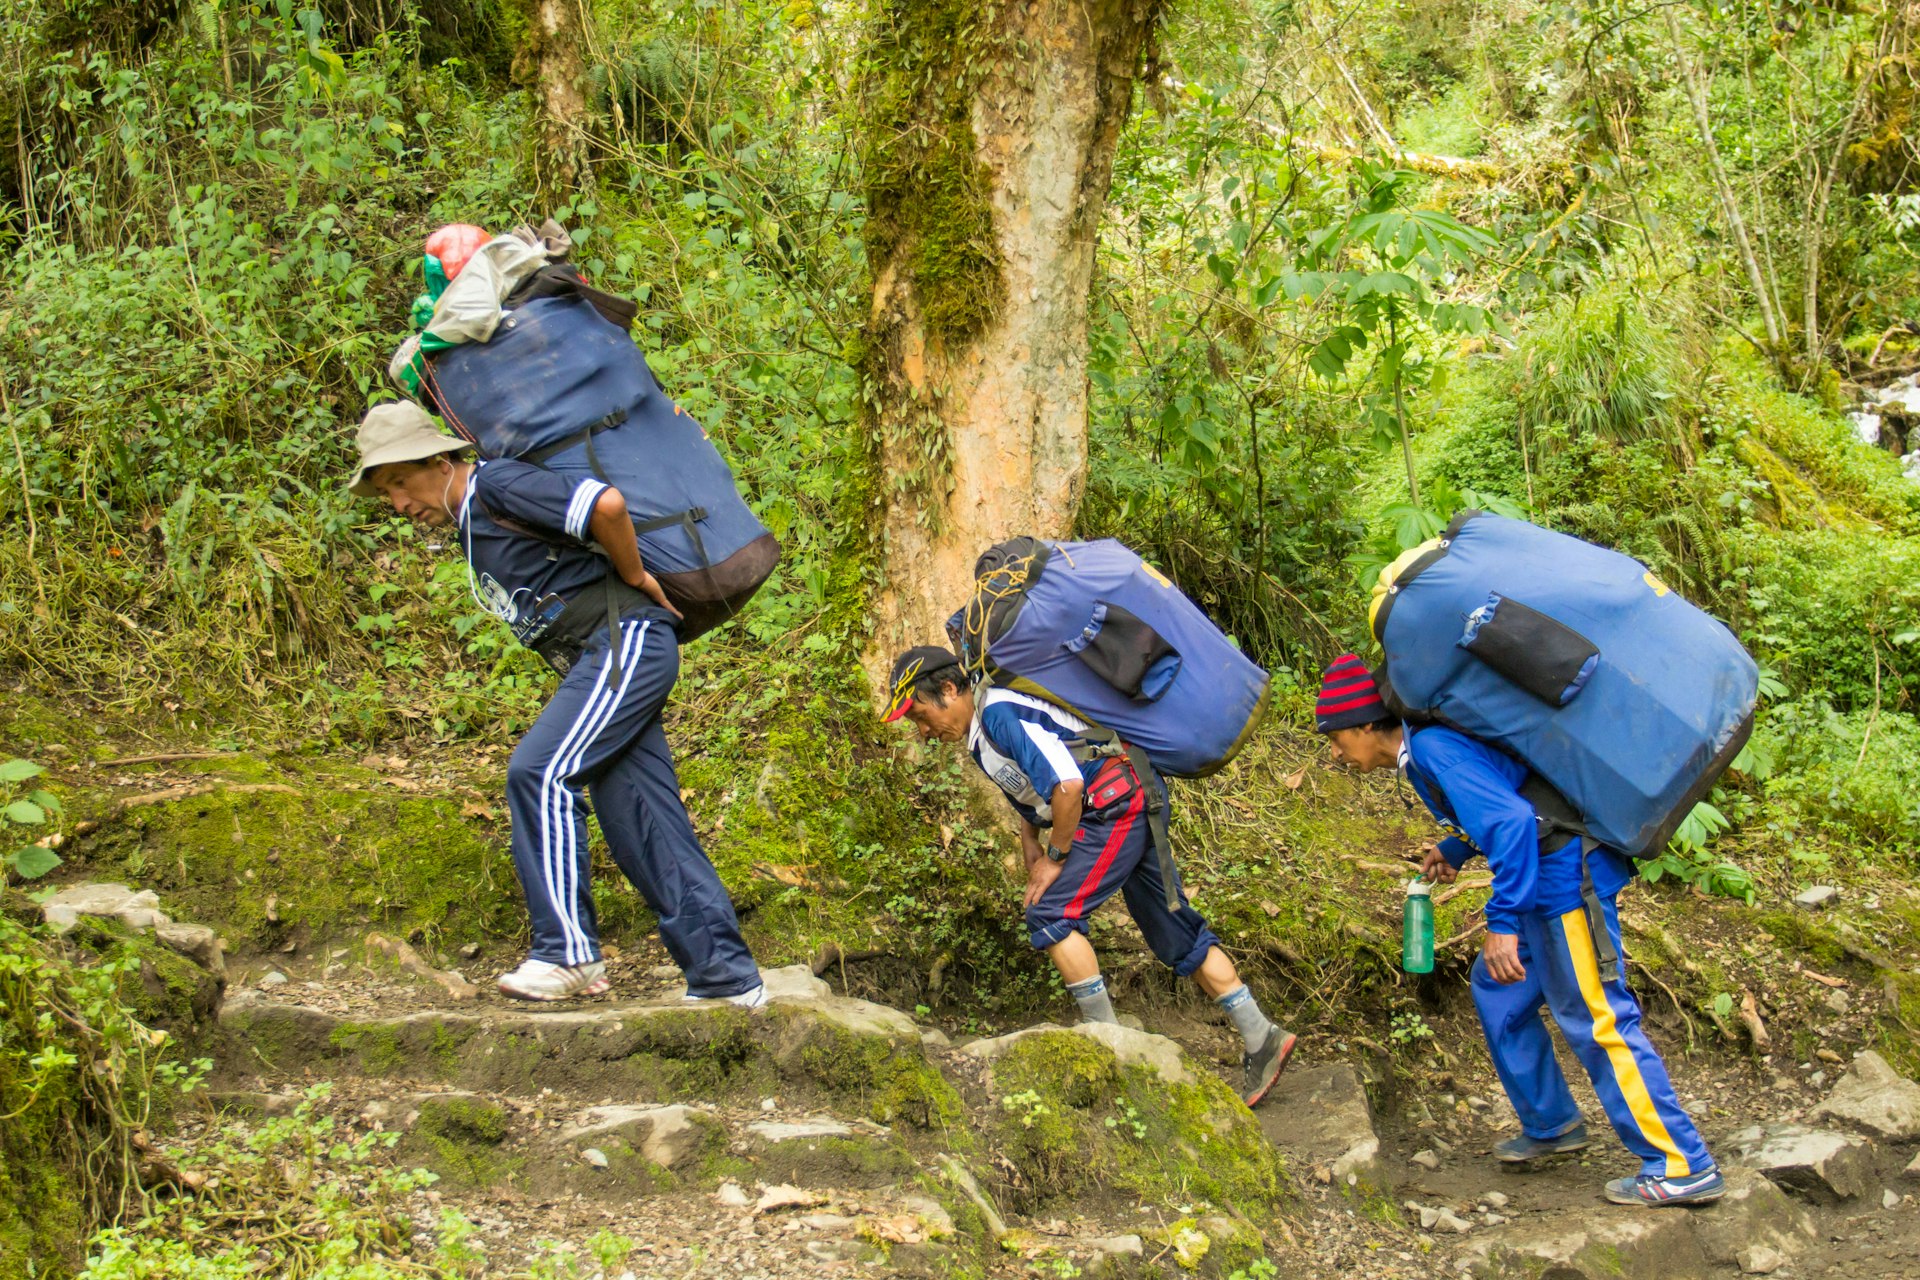 Peruvian porters with loaded packs carrying camping gear for hikers on the Inca Trail